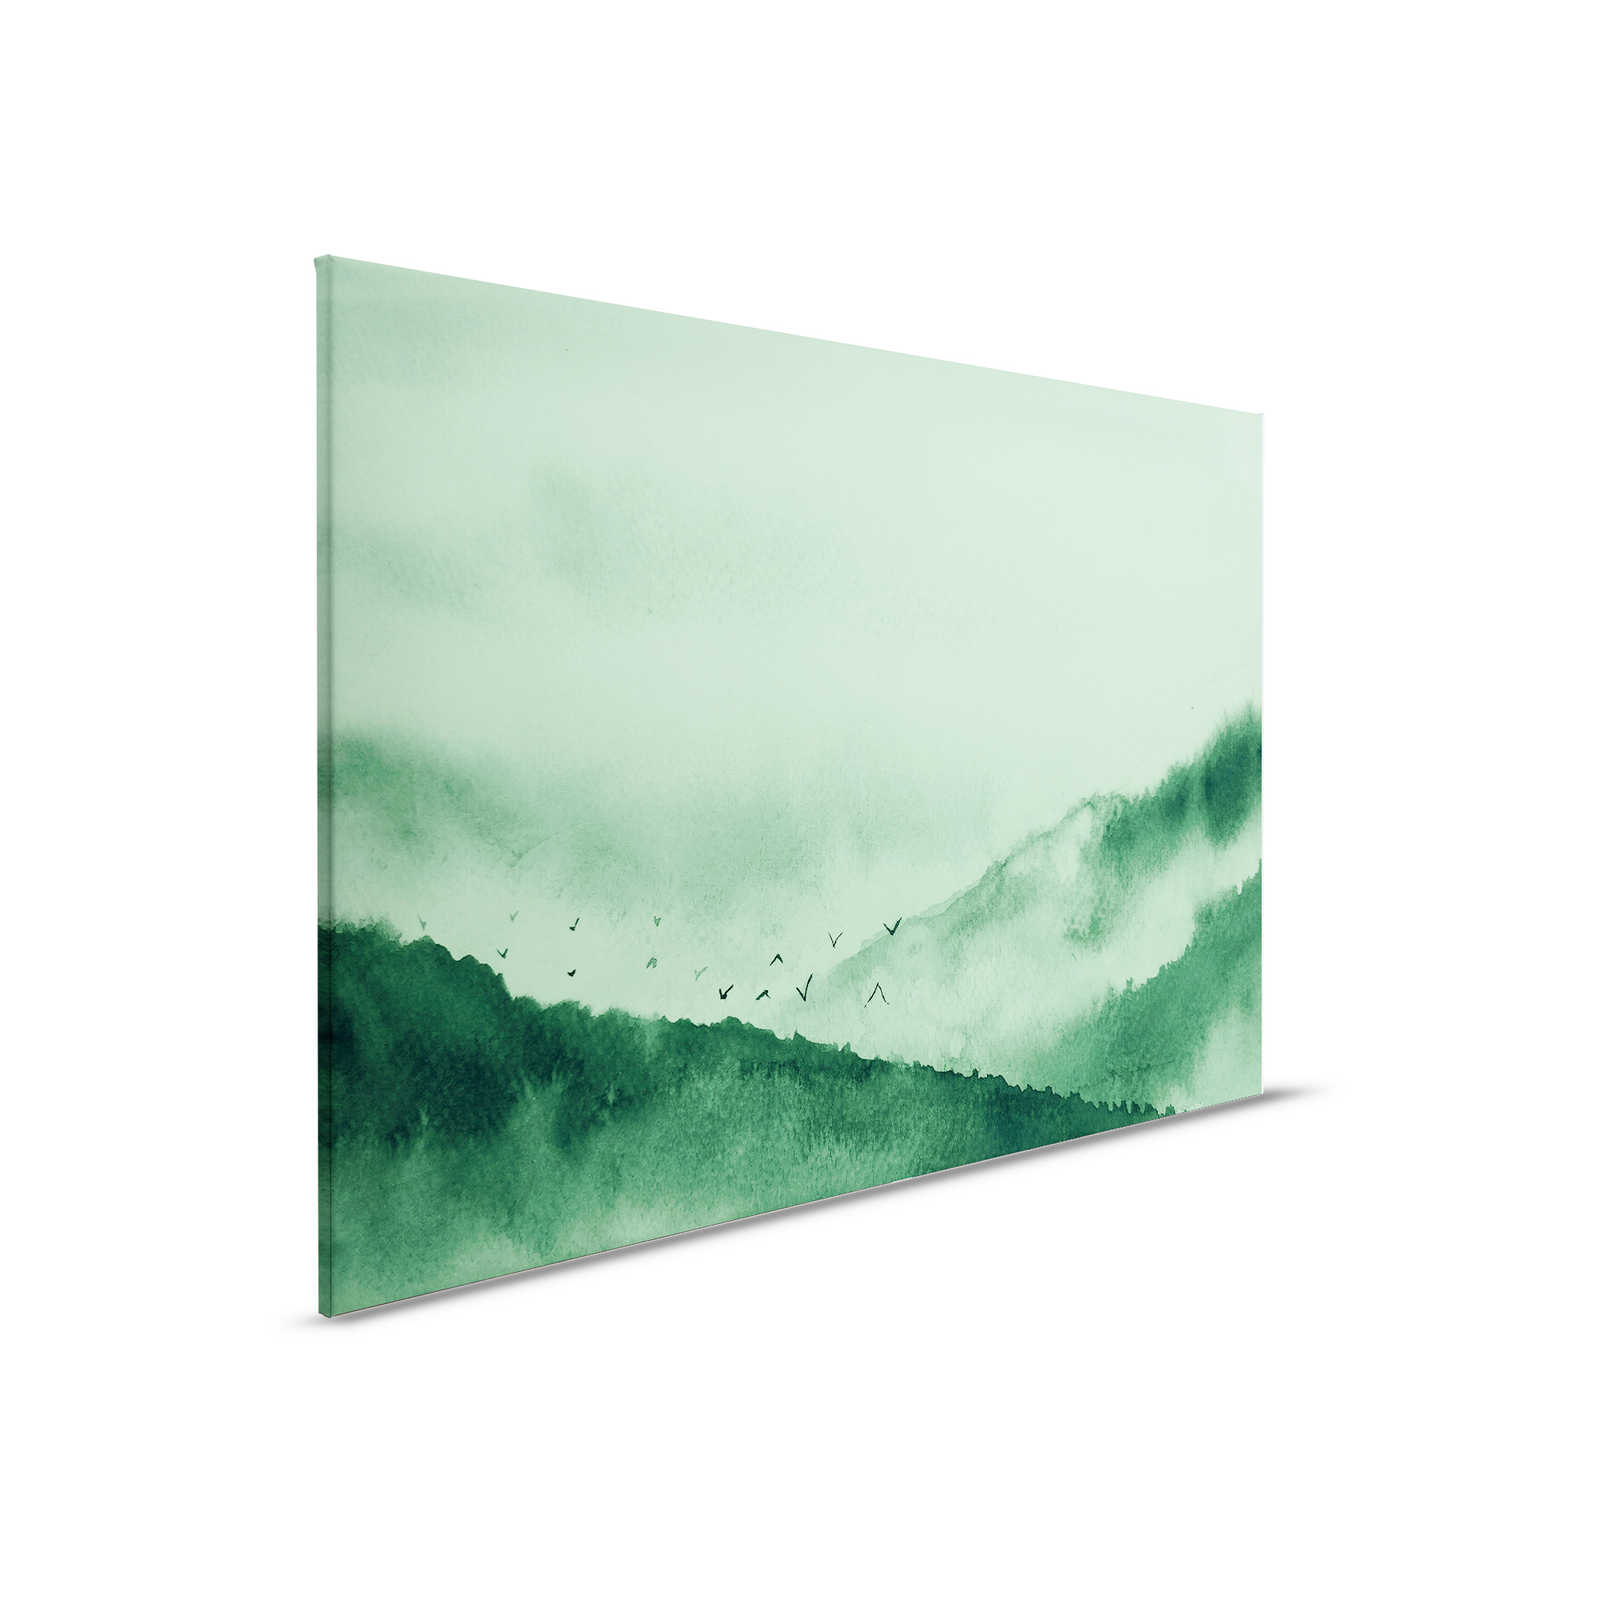         Canvas with foggy landscape in painting style | green, black - 0.90 m x 0.60 m
    